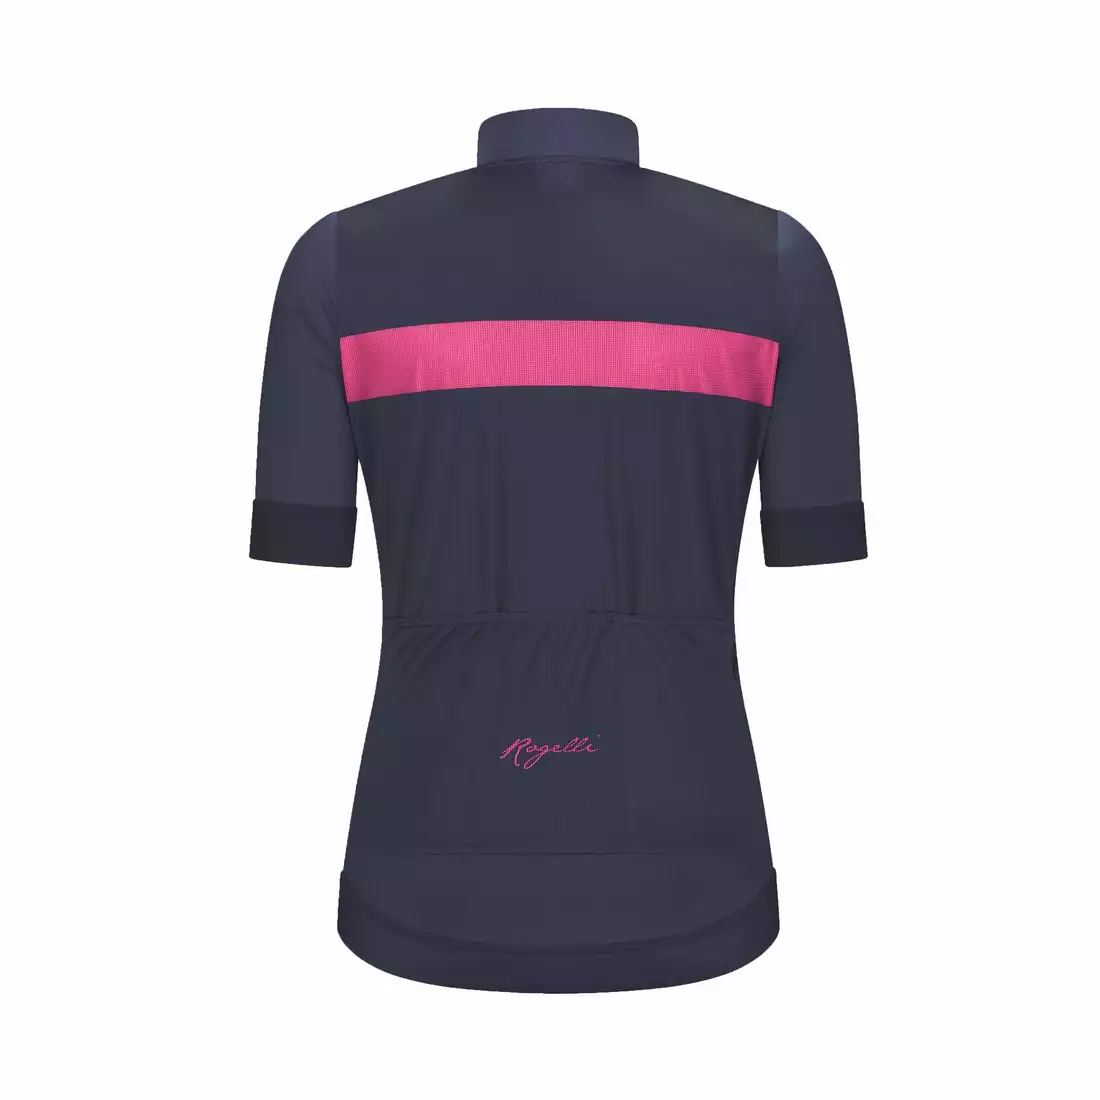 ROGELLI PRIME Women's cycling jersey, navy blue and pink